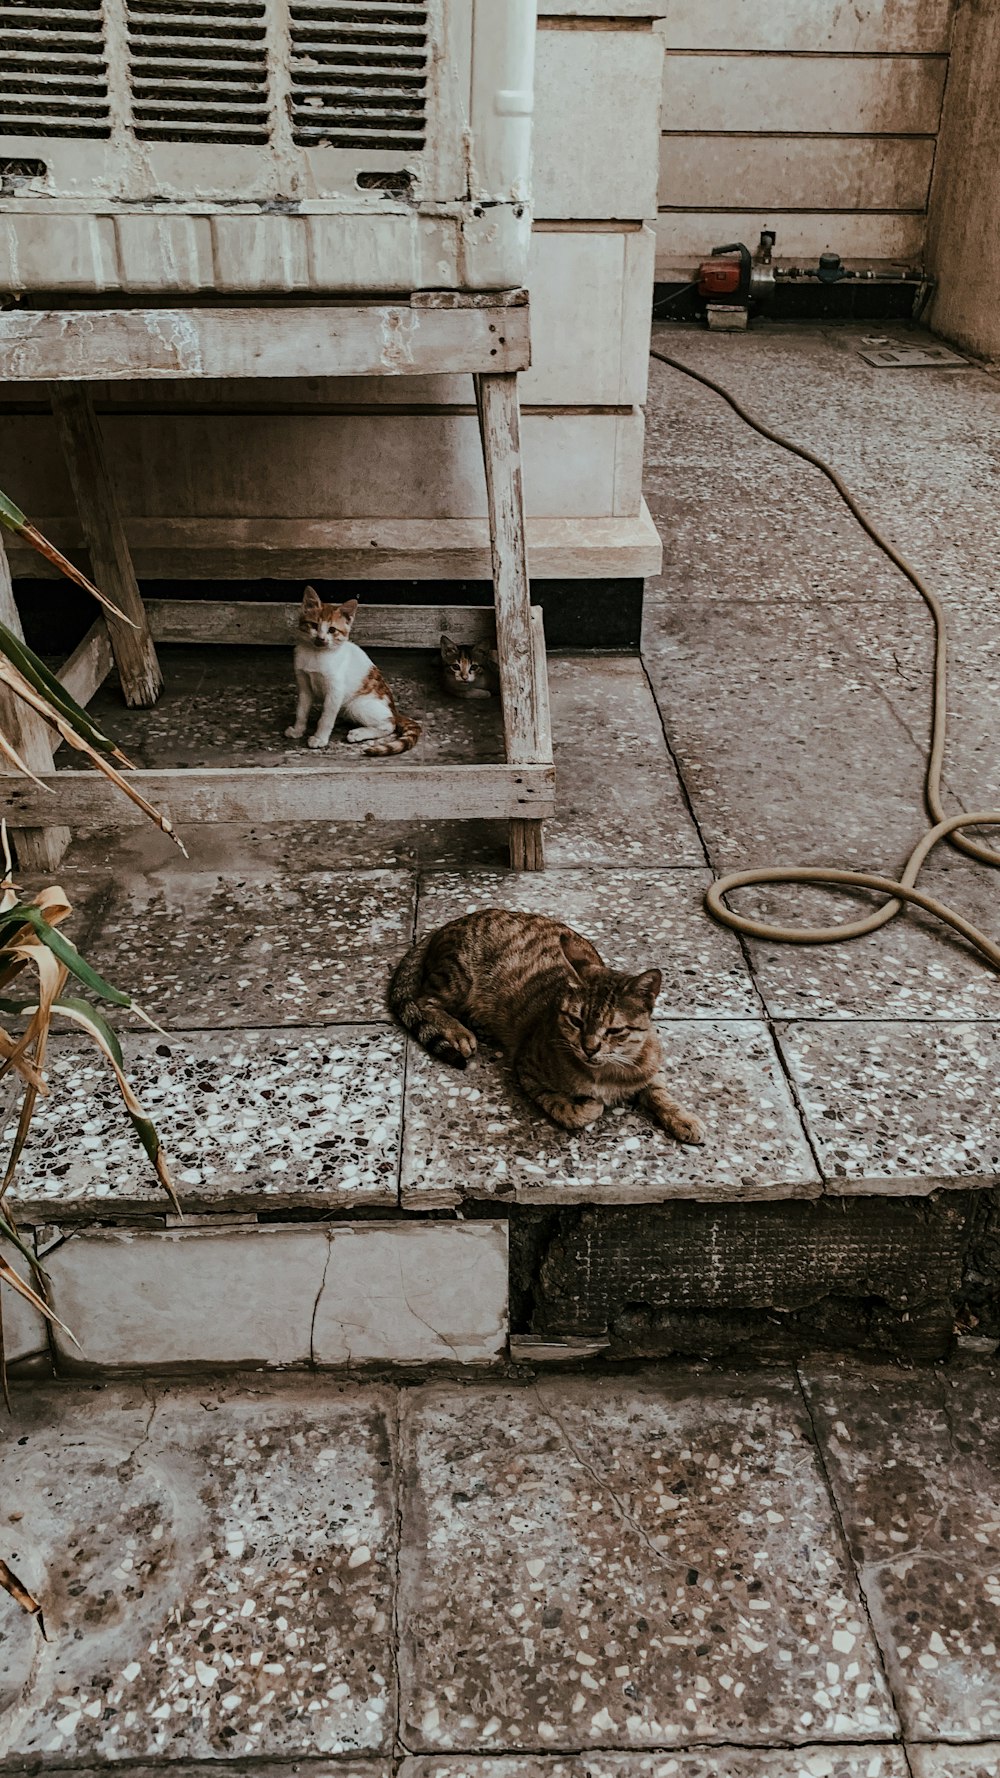 brown tabby cat beside white and brown cat on gray concrete floor